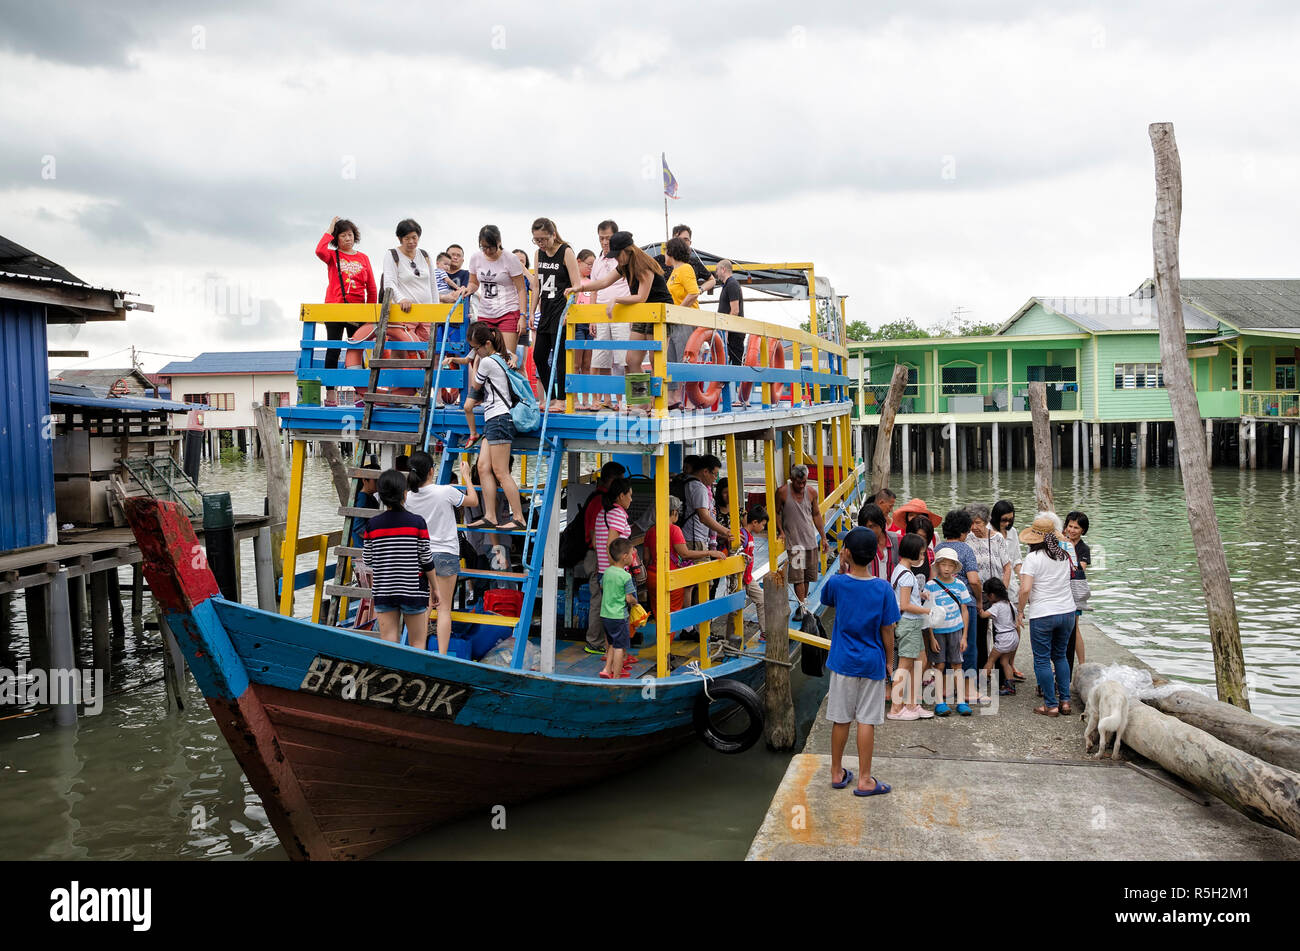 Pulau Ketam, Malaysia December 30, 2017: Unidentified tourists alighting from touring wooden boat at jetty in Pulau Ketam, Malaysia - wooden colorful  Stock Photo